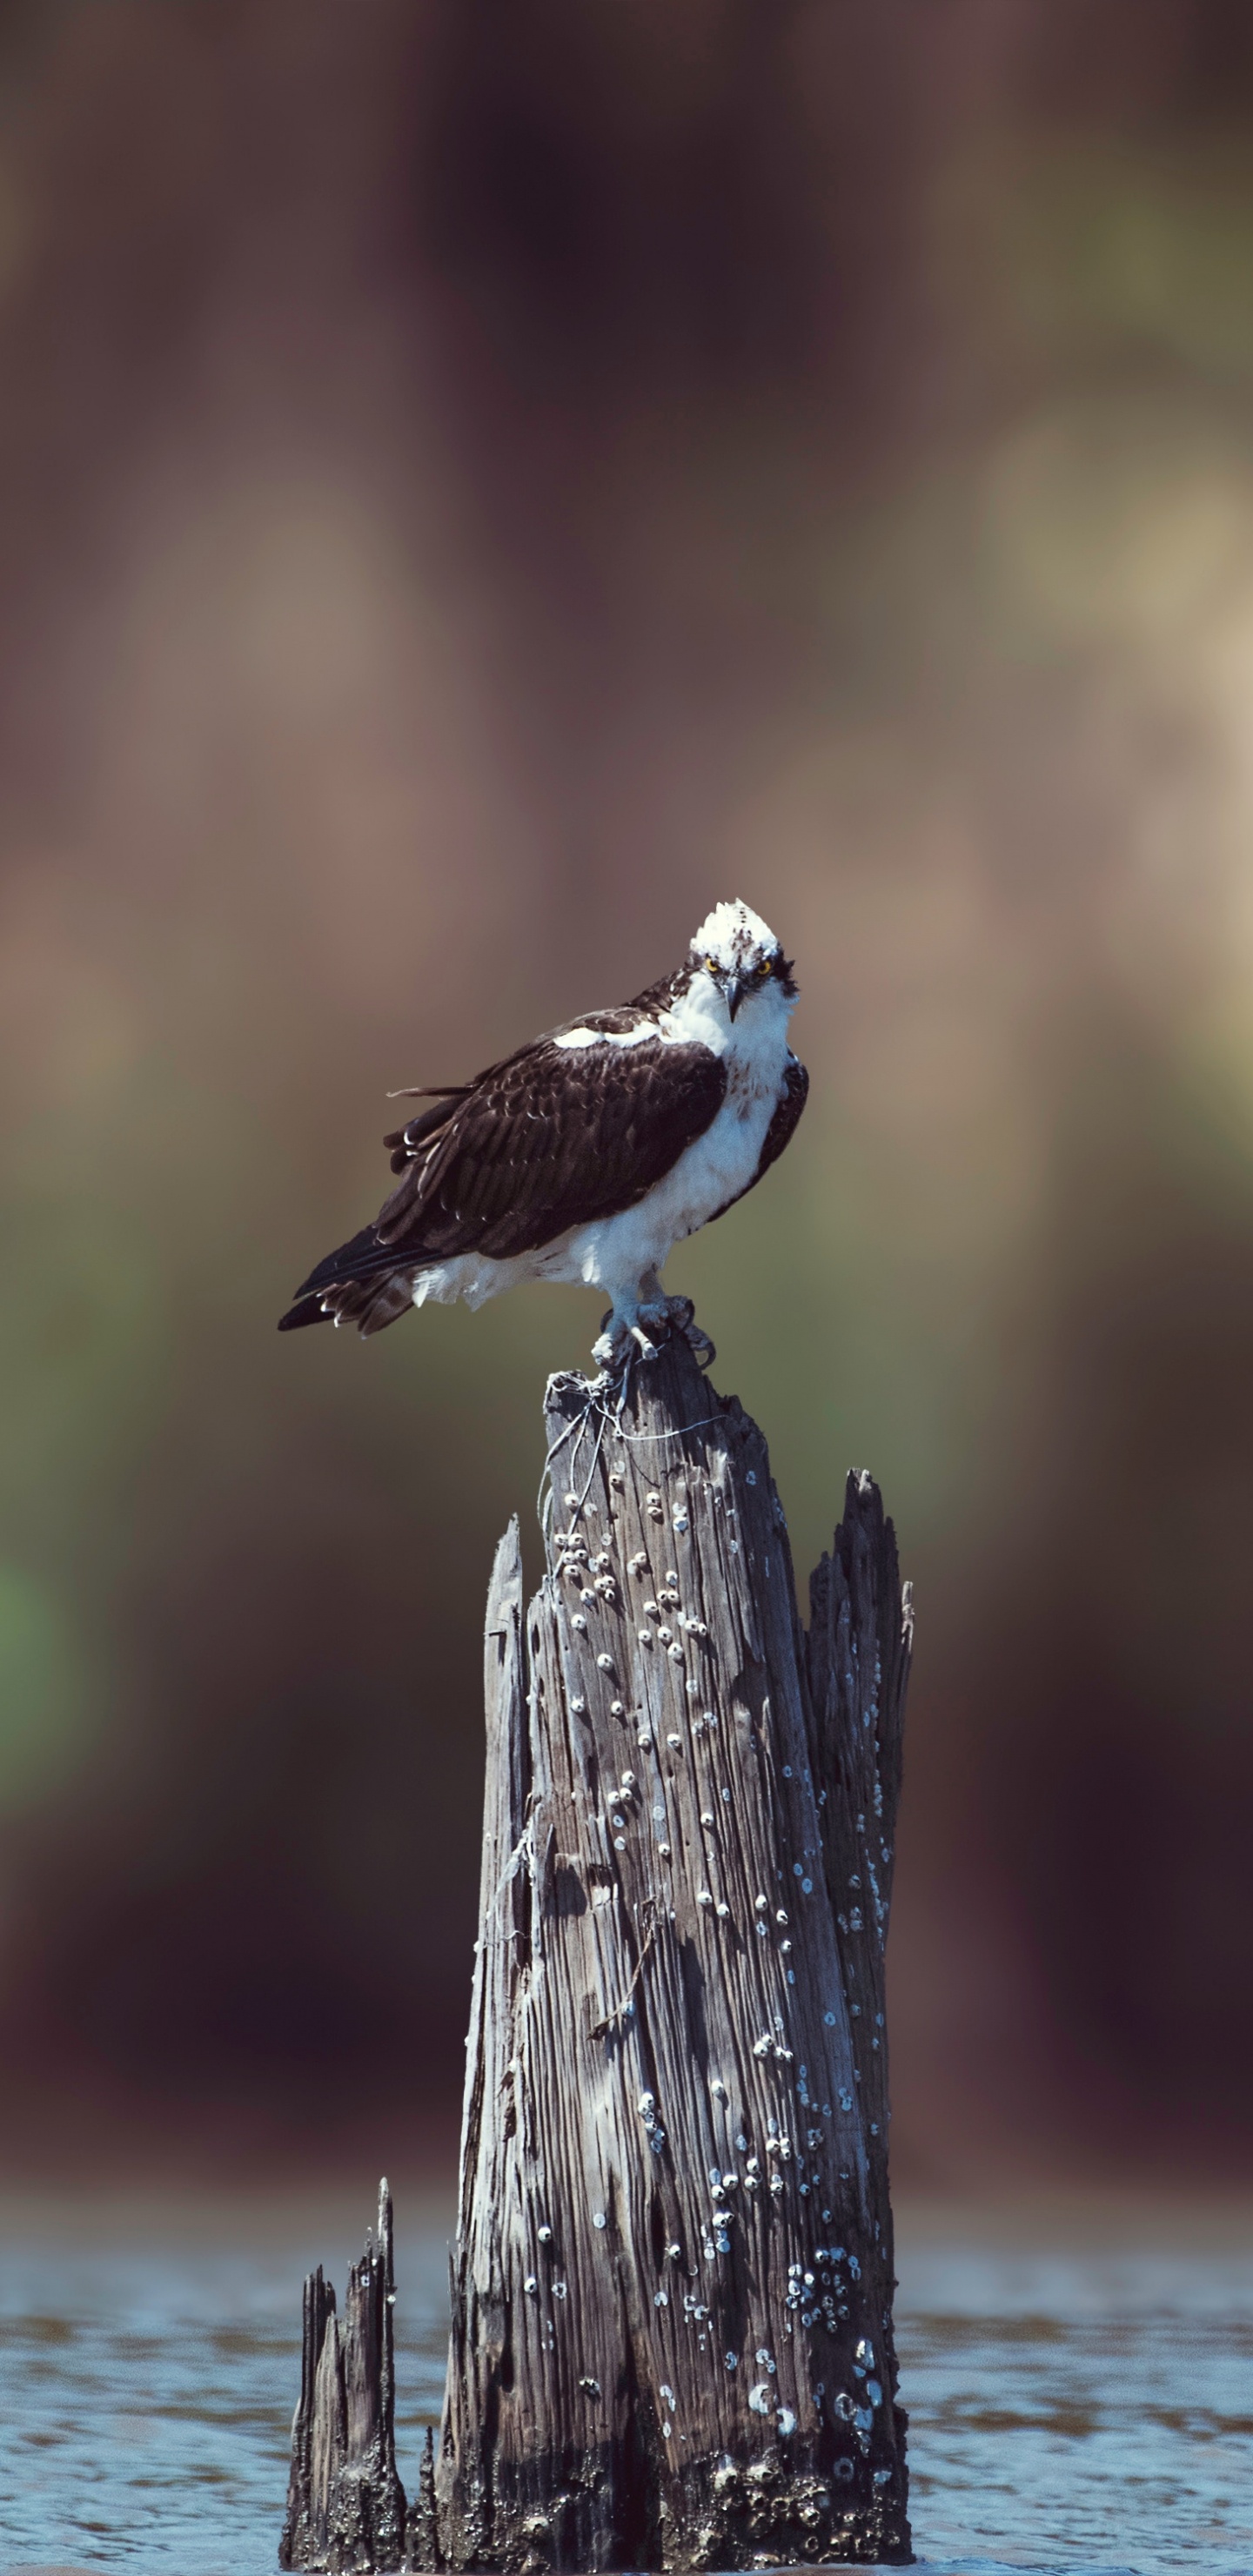 White and Brown Bird Perched on Brown Wooden Post. Wallpaper in 1440x2960 Resolution